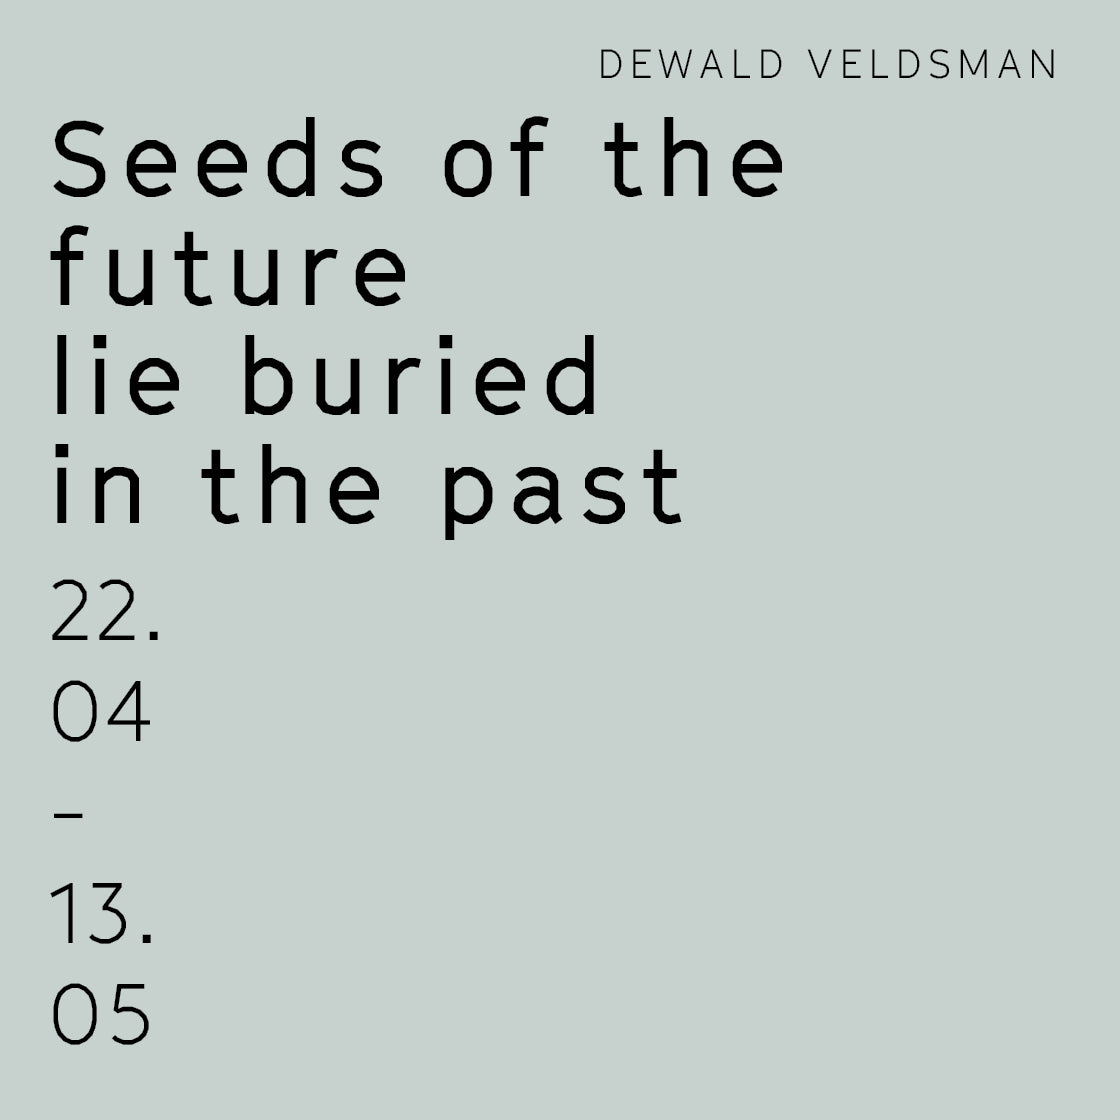 SEEDS OF THE FUTURE LIE BURIED IN THE PAST